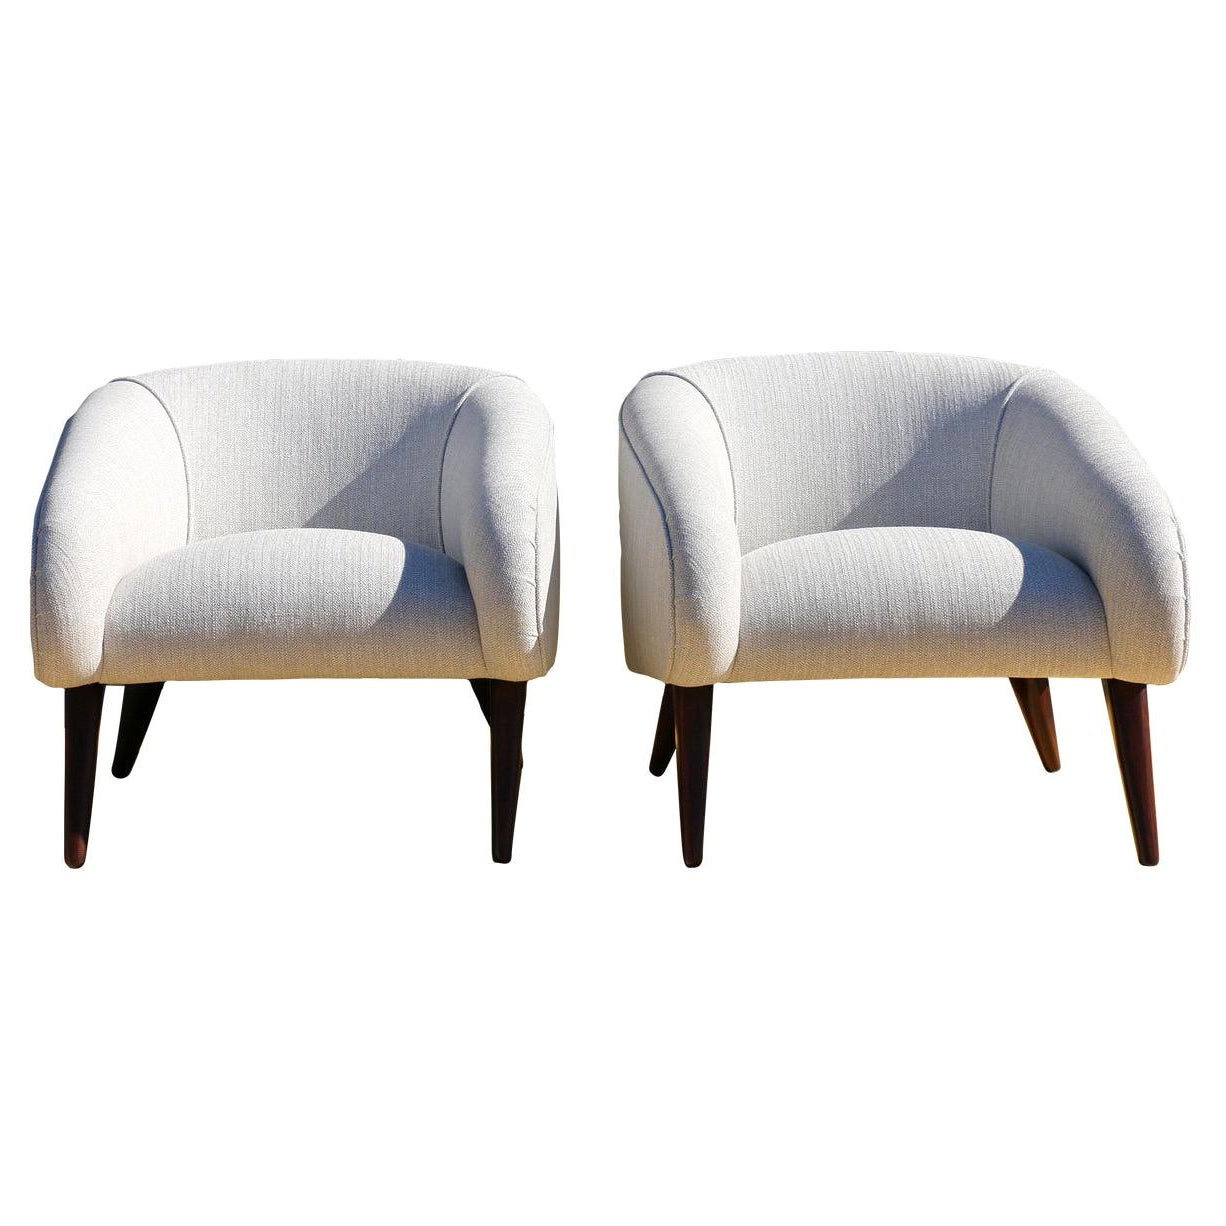 Pair of Mid Century Modern 1950’s Lounge Chairs by Sherman Bertram For Sale